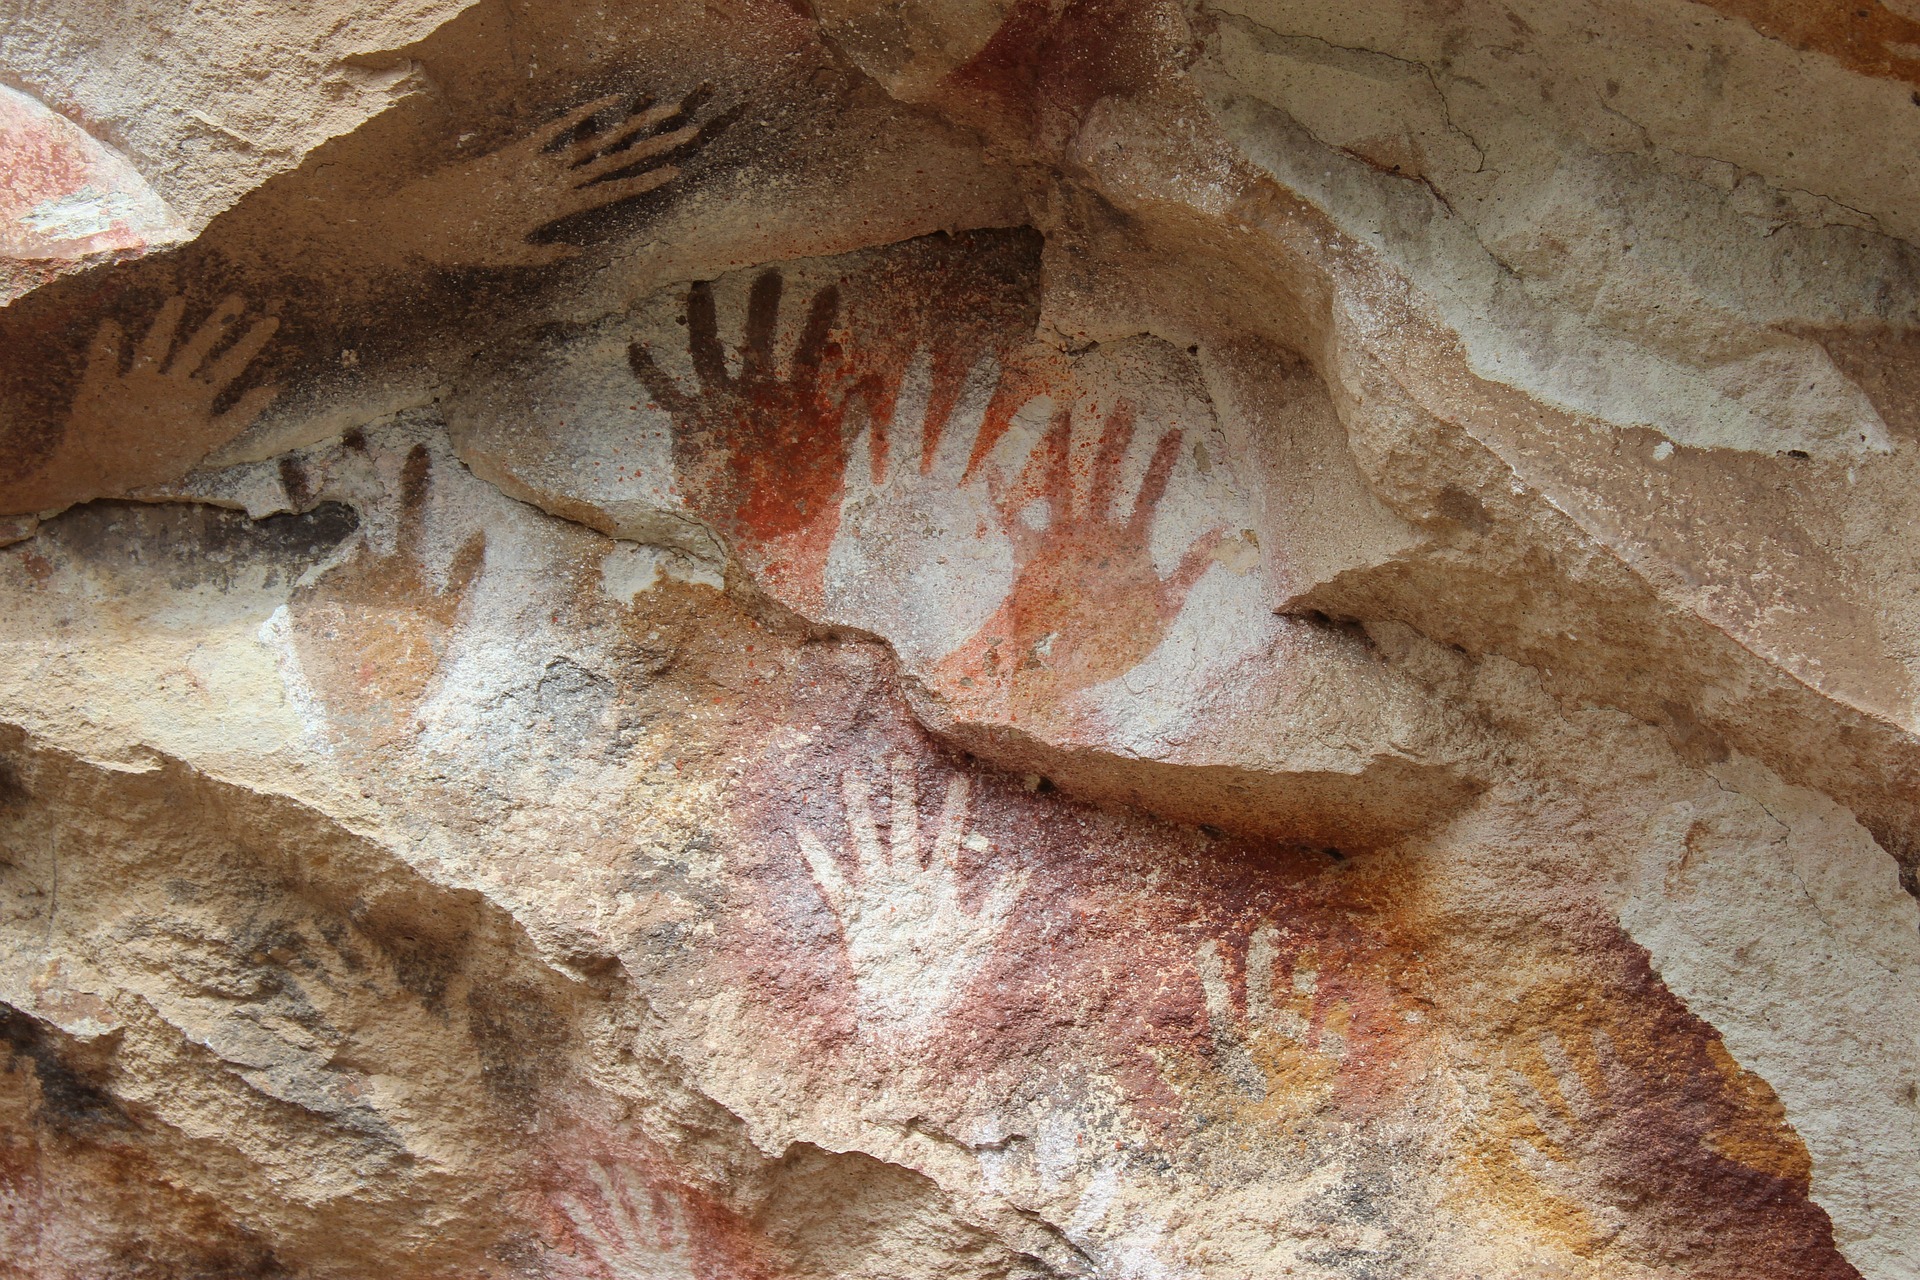 Cave art featuring painted hand prints